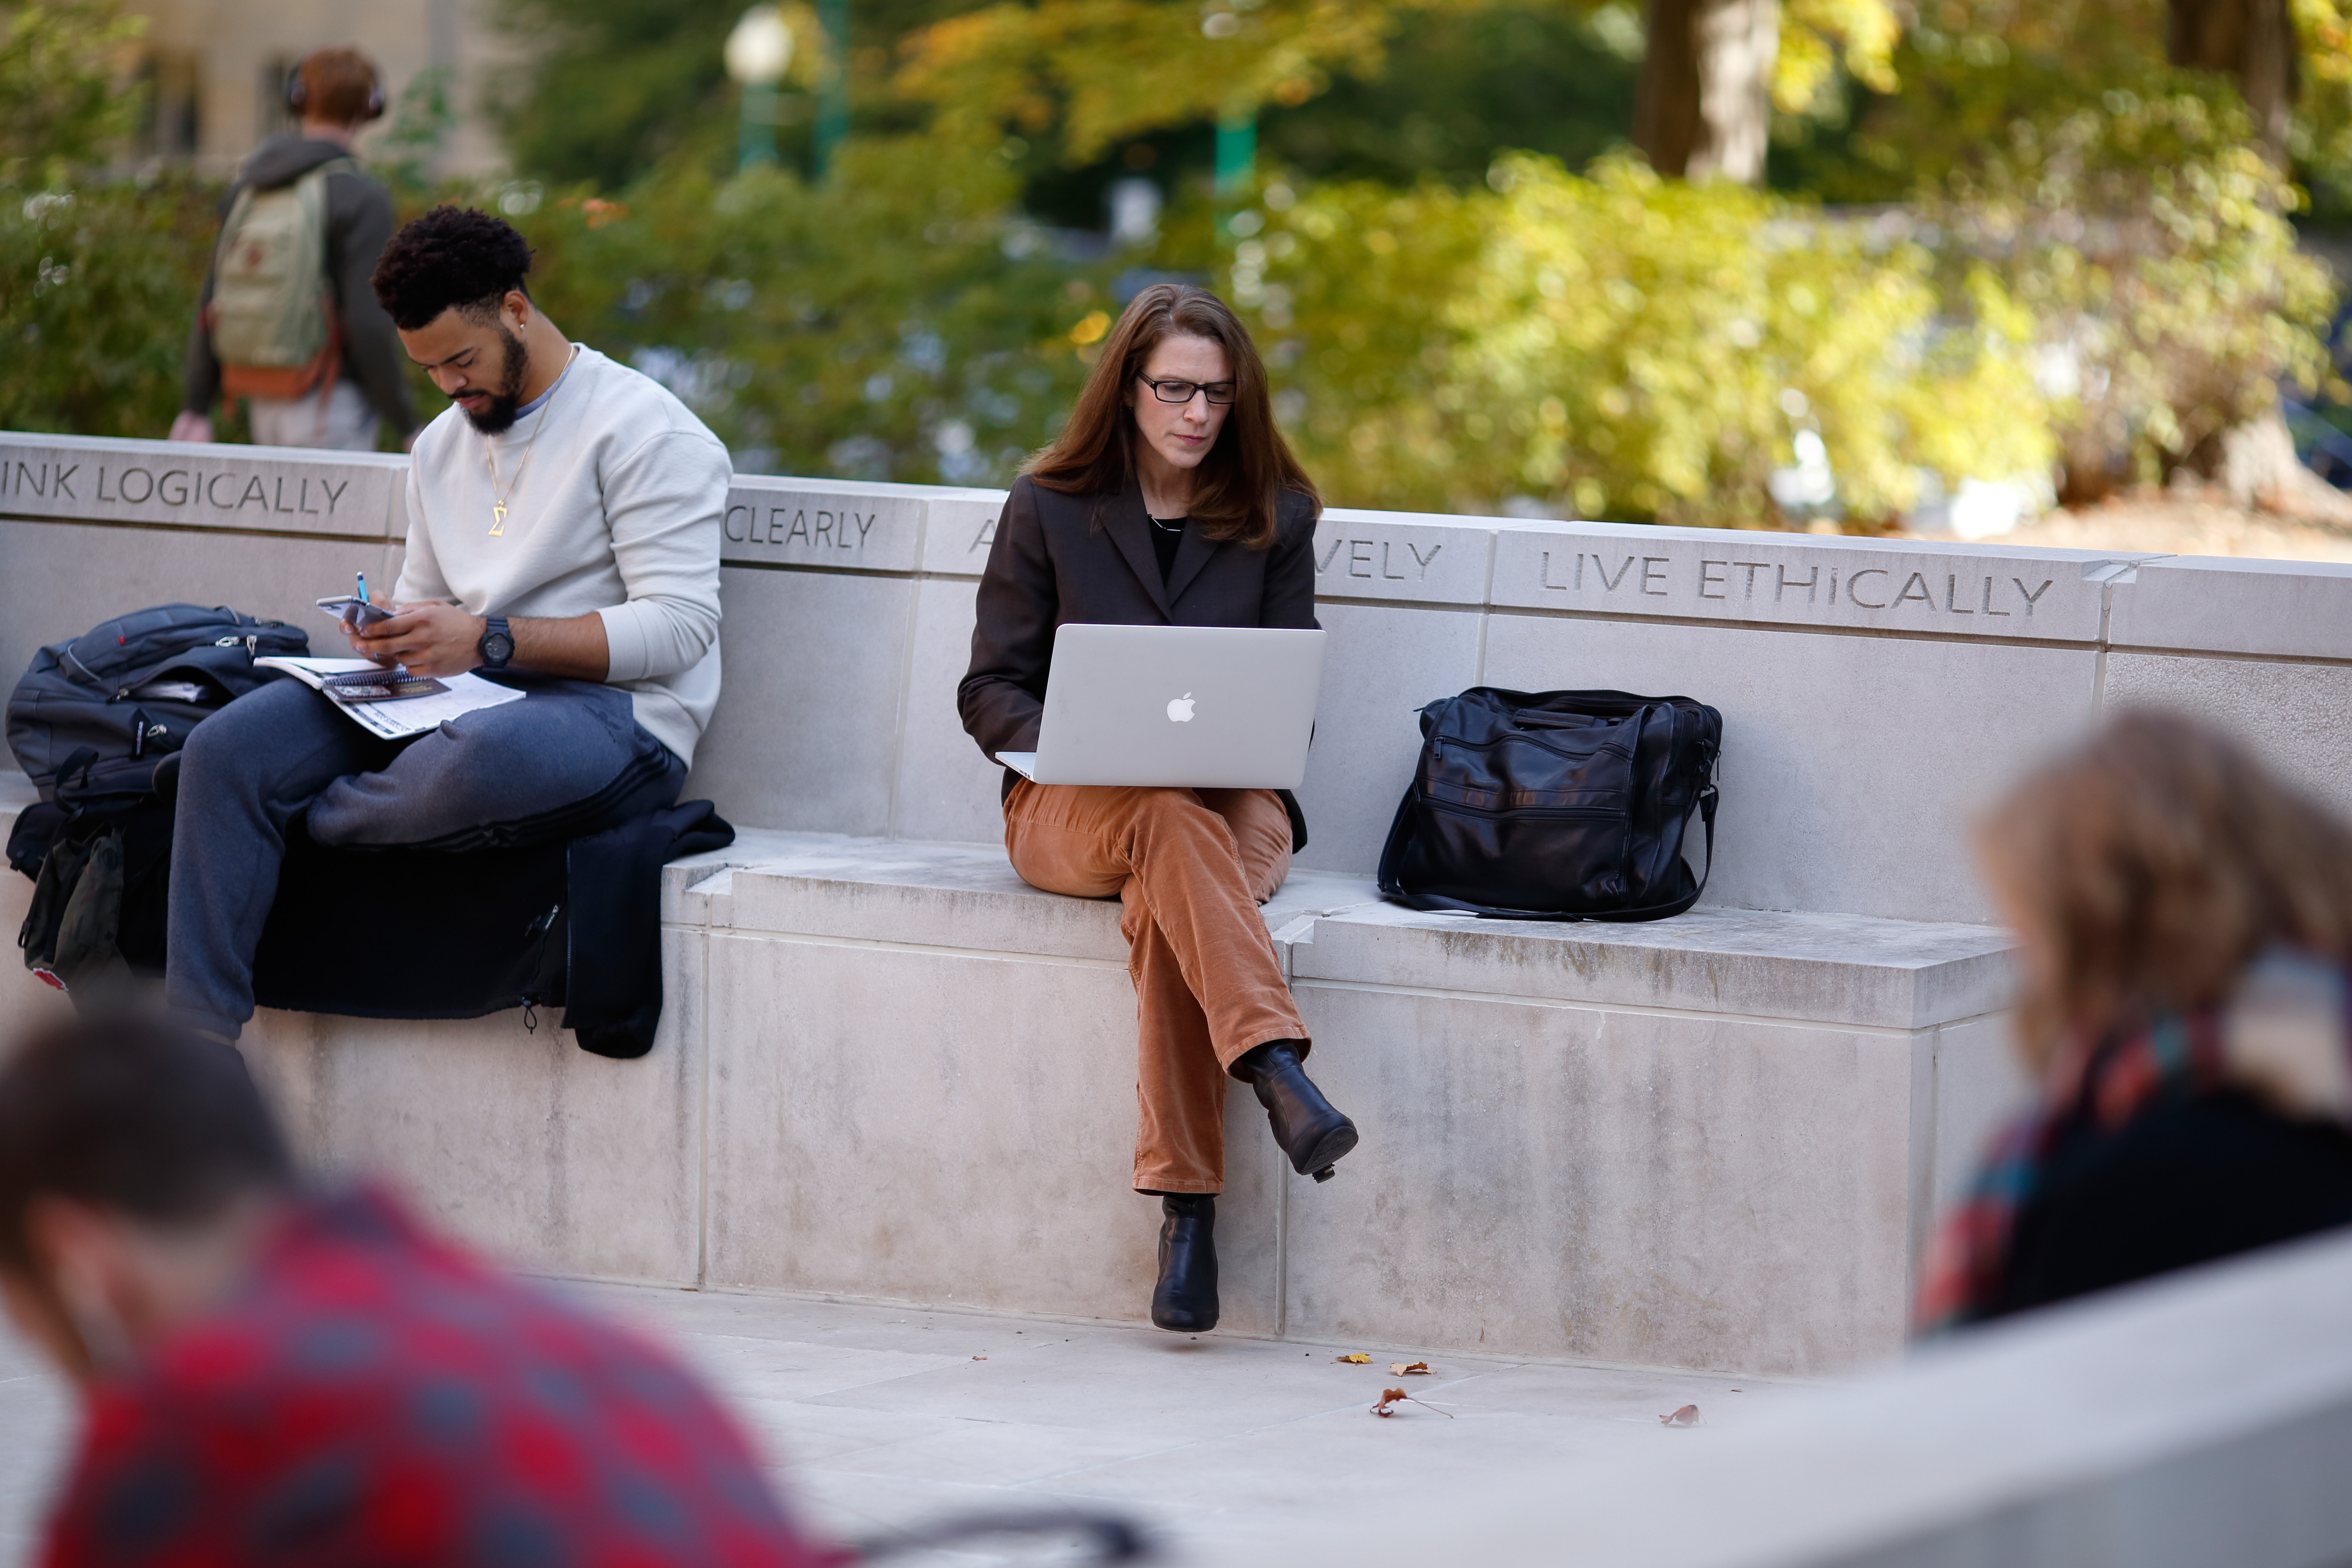 Students sitting on a bench inscribed with the College's Foundational Skills of Think Logically, Communicate Clearly, Act Creatively, and Live Ethically. Missing from the image is Question Critically.